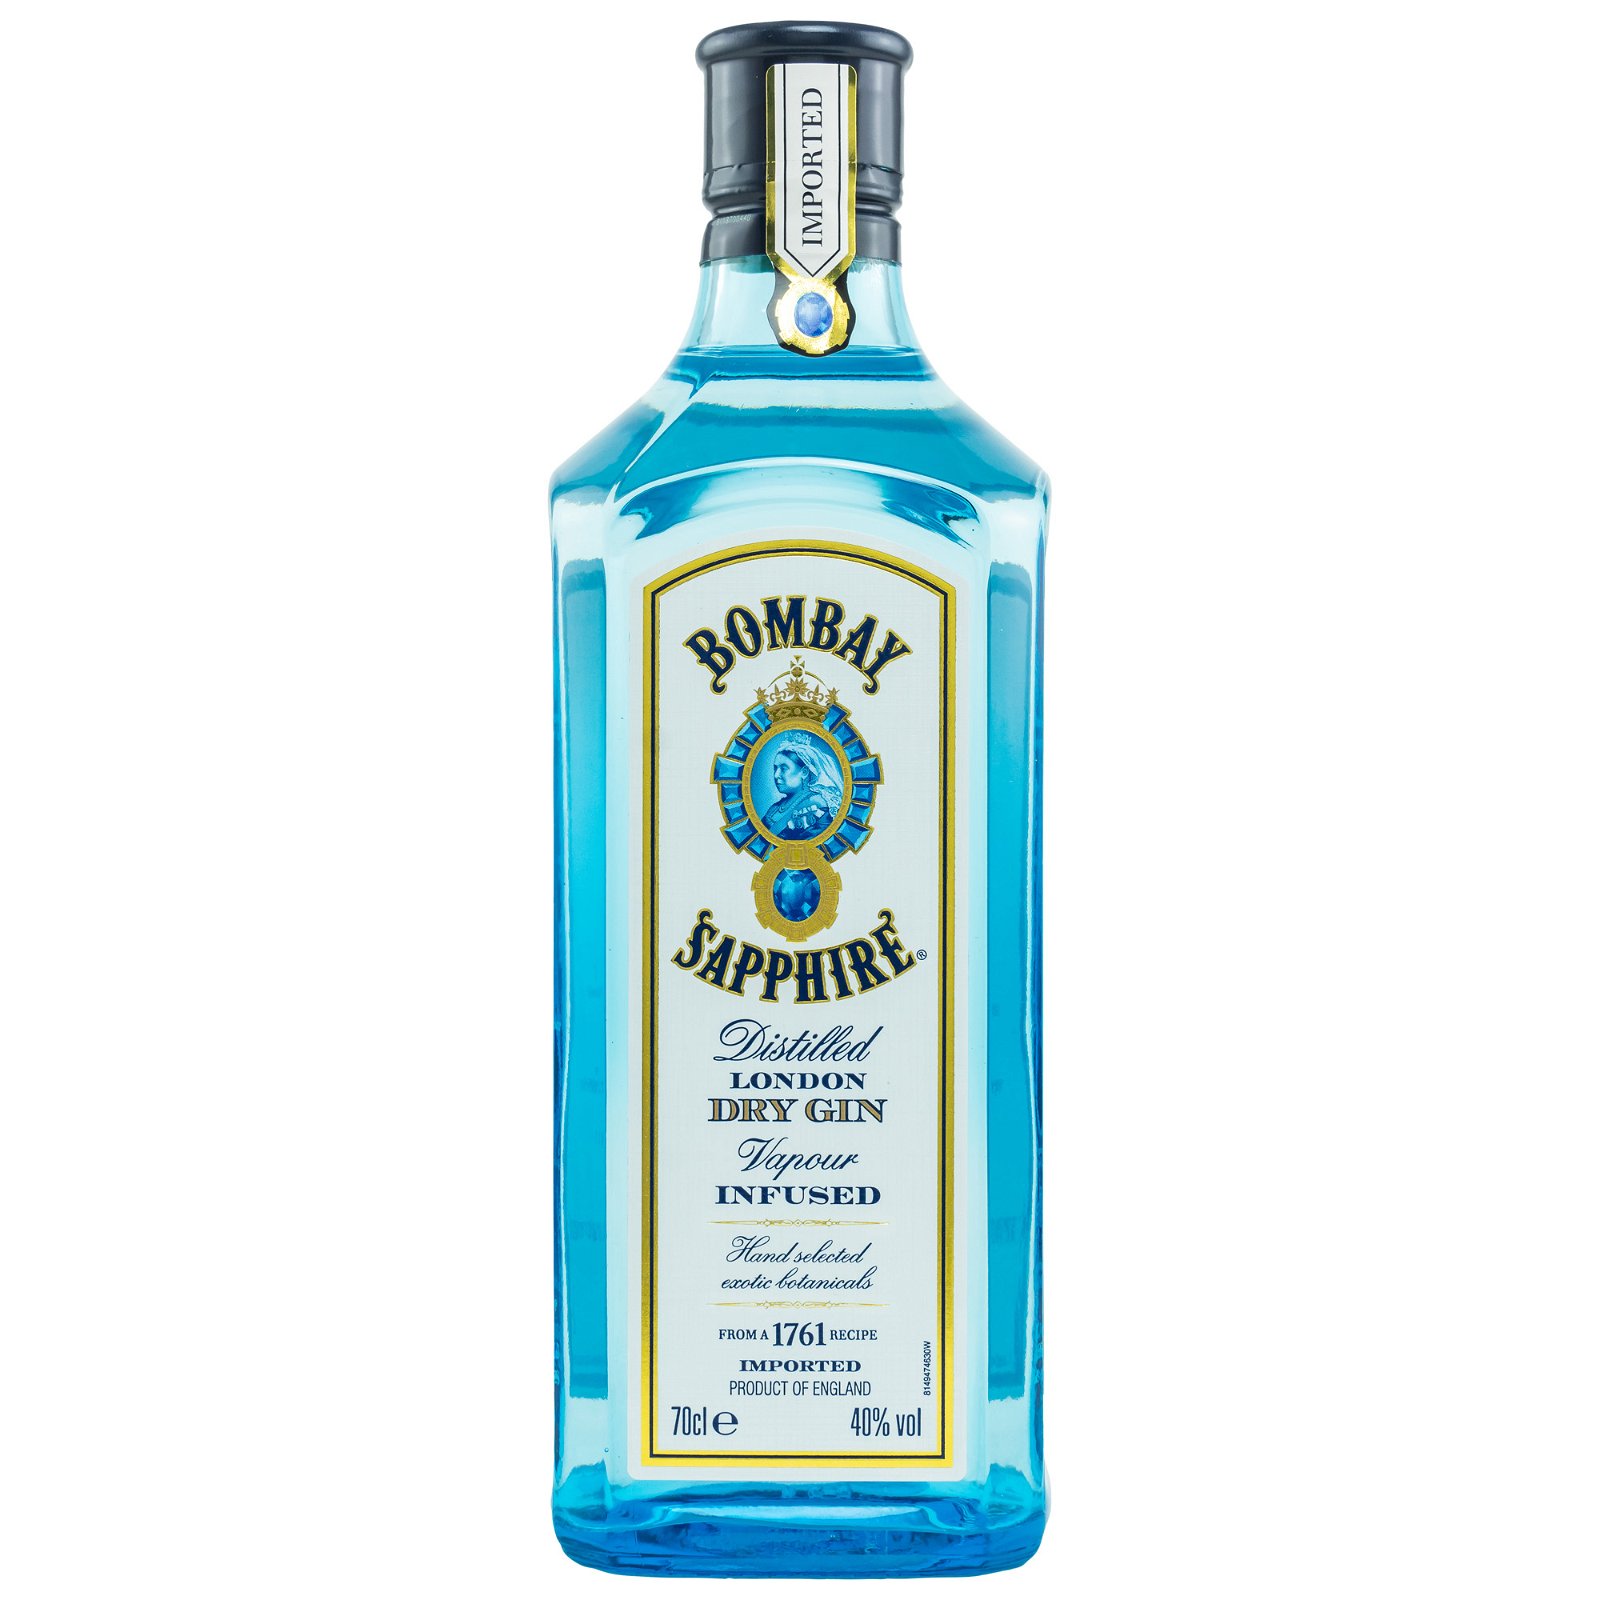 Bombay Sapphire London Dry Gin Vapour Infused